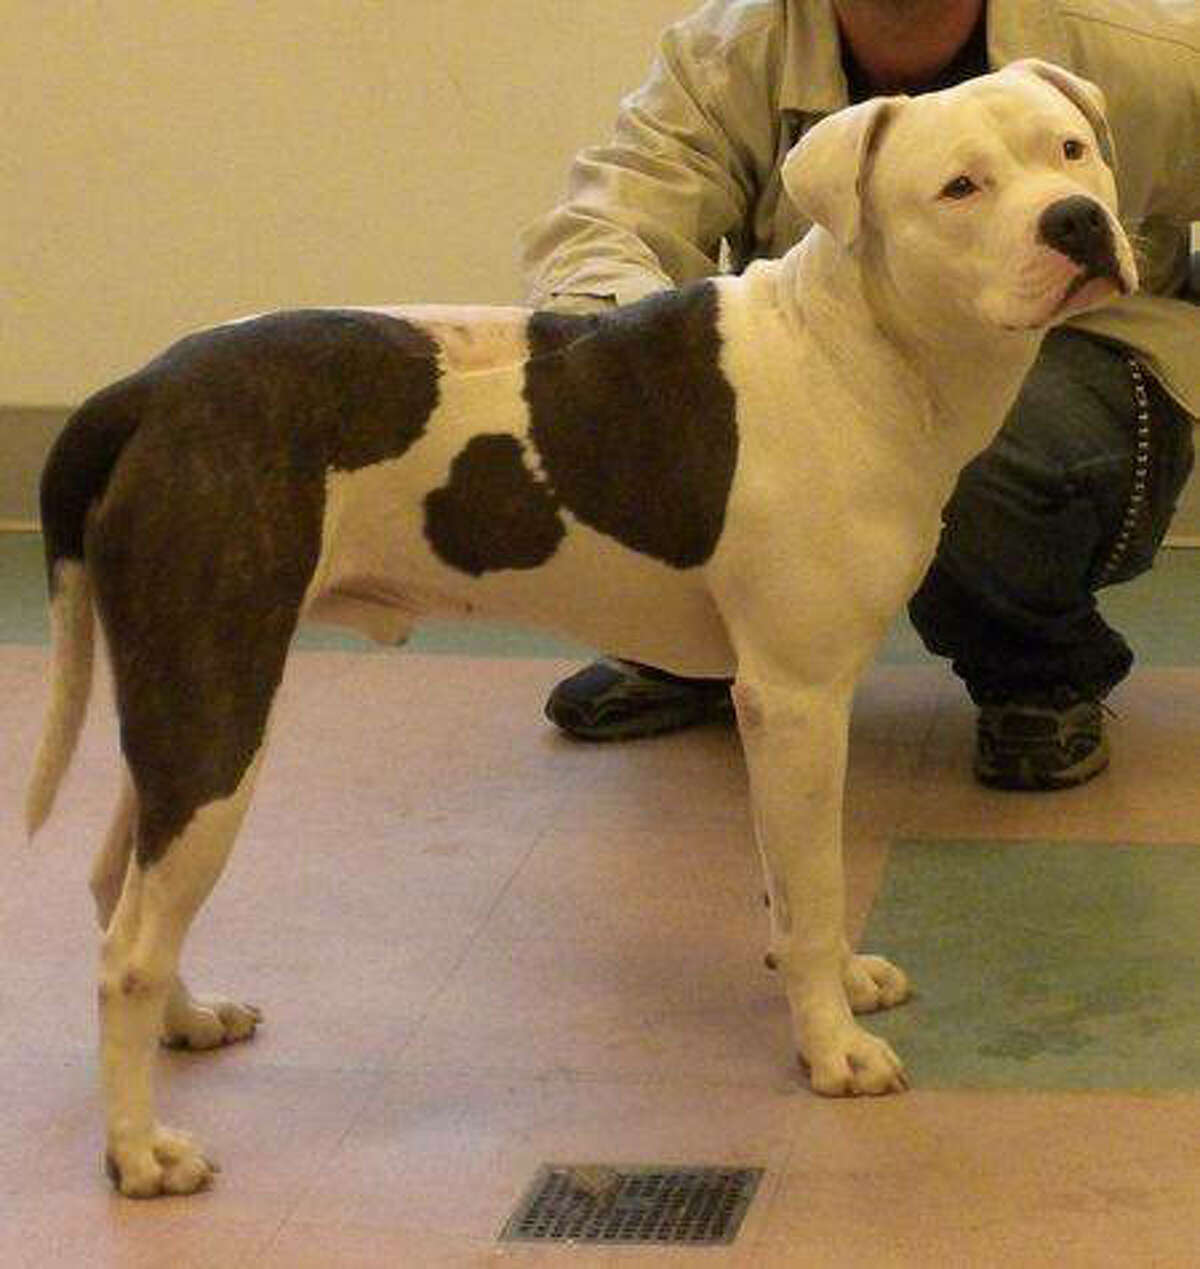 Blueberry, a pit bull, was beaten with a crowbar and ax handle. His owner was convicted in February, 2011 of animal cruelty. Credit: Courtesy, Friends of Oakland Animal Services